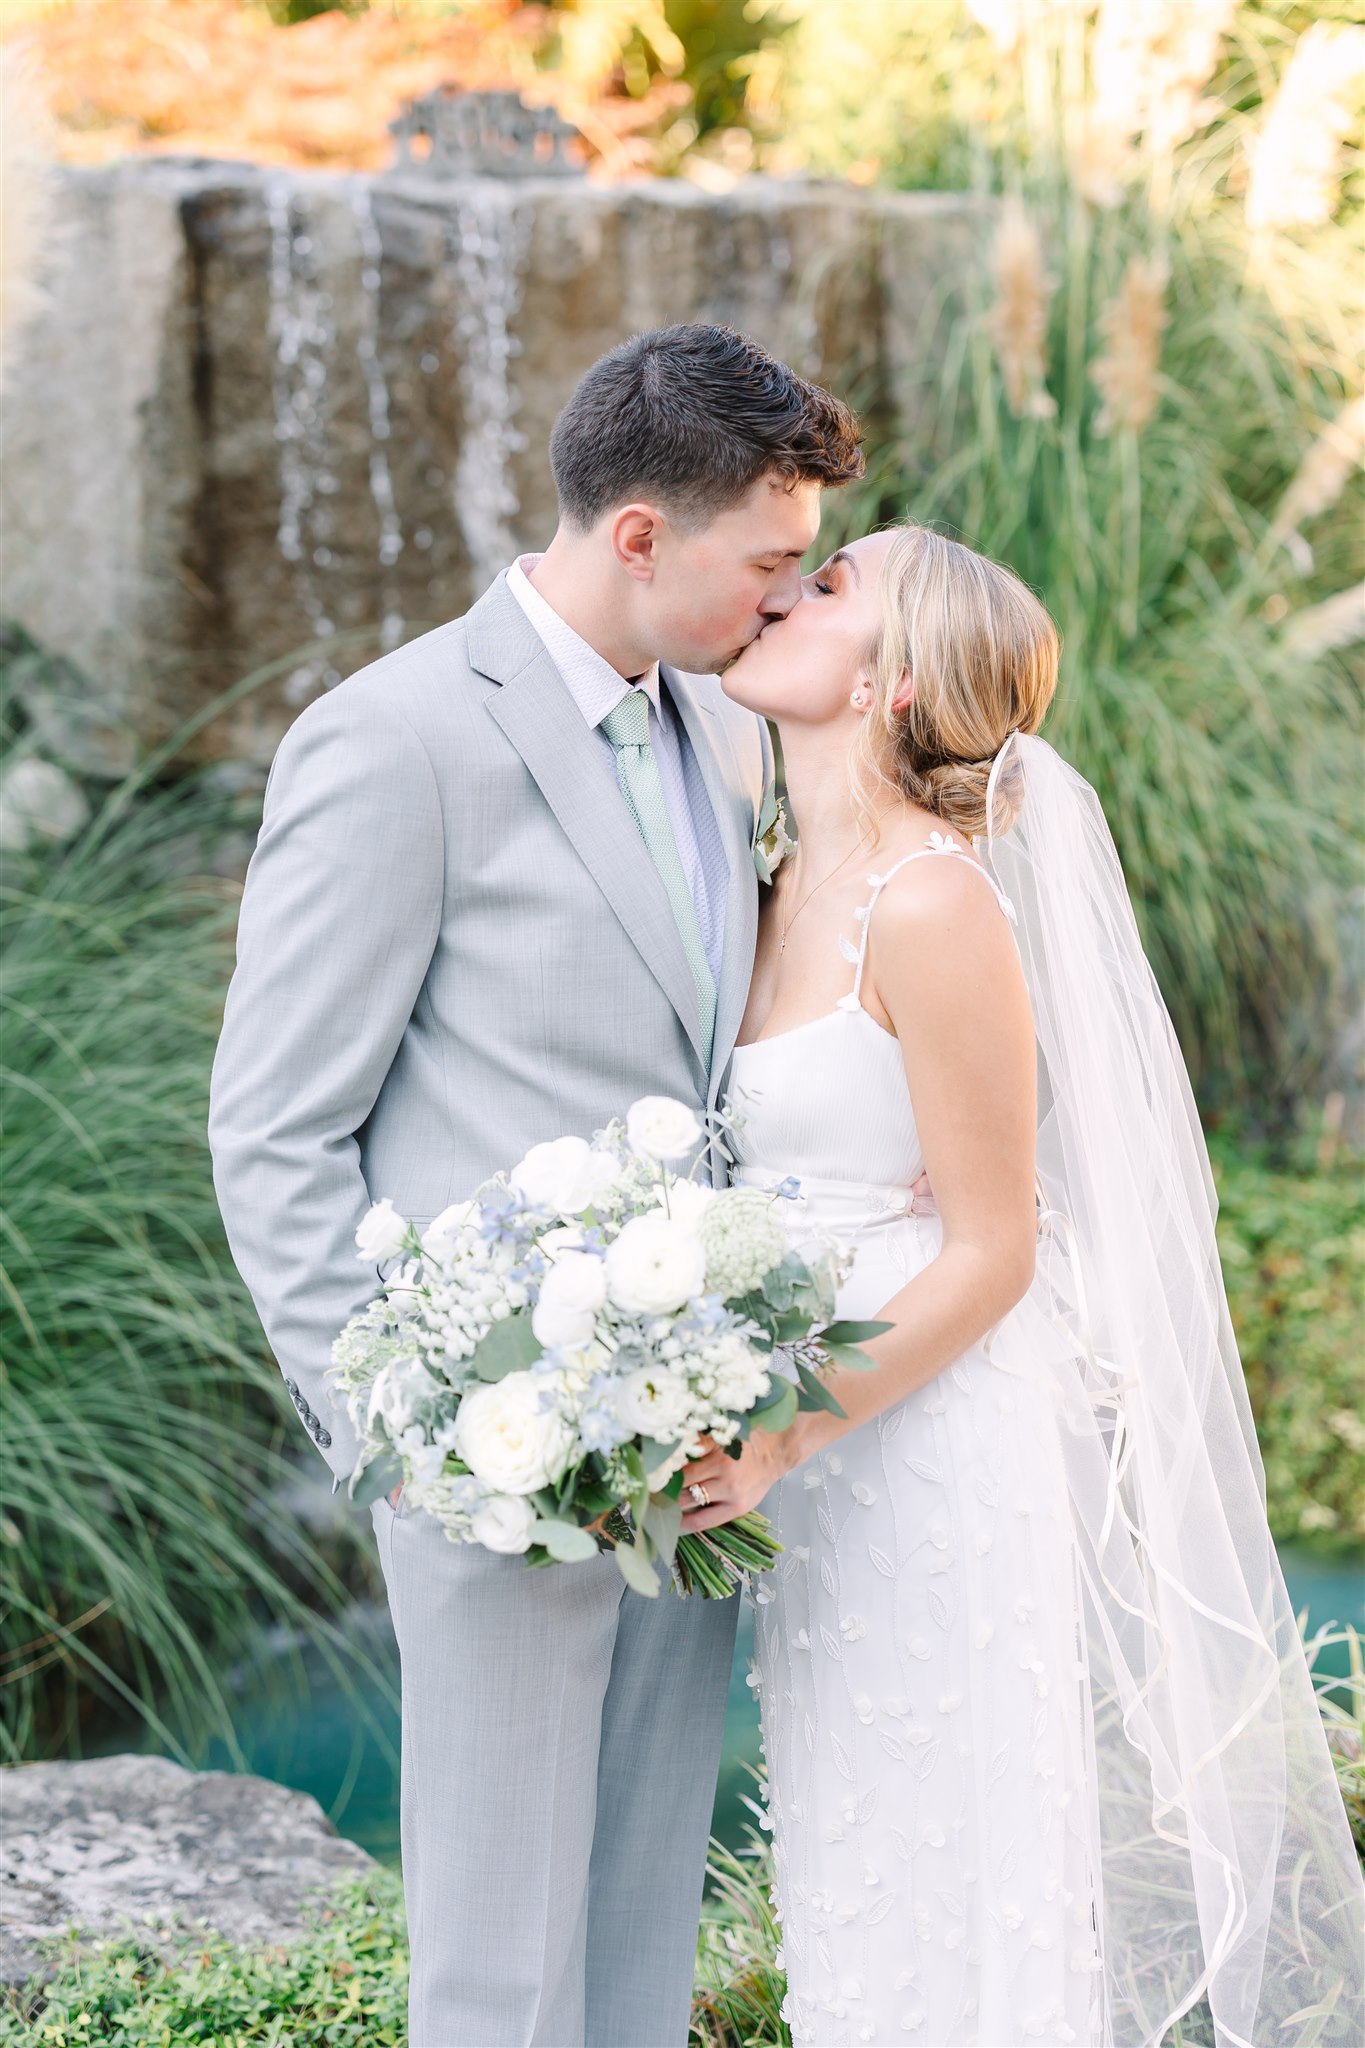 Bride and groom kiss in front of the waterfall at the glamorous wedding at a private residence.